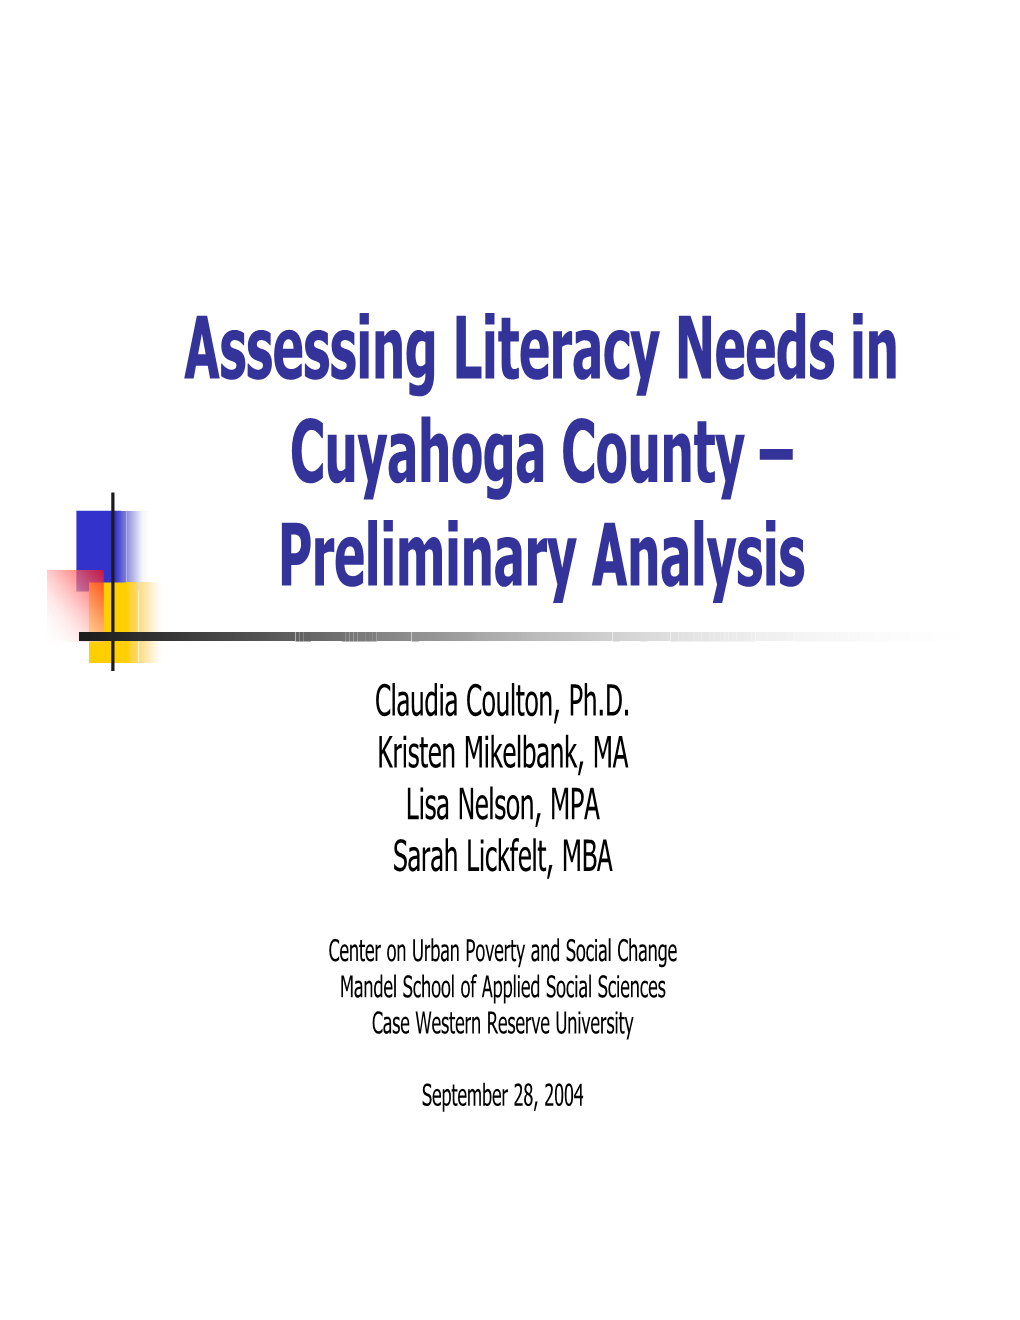 Assessing Literacy Needs in Cuyahoga County – Preliminary Analysis